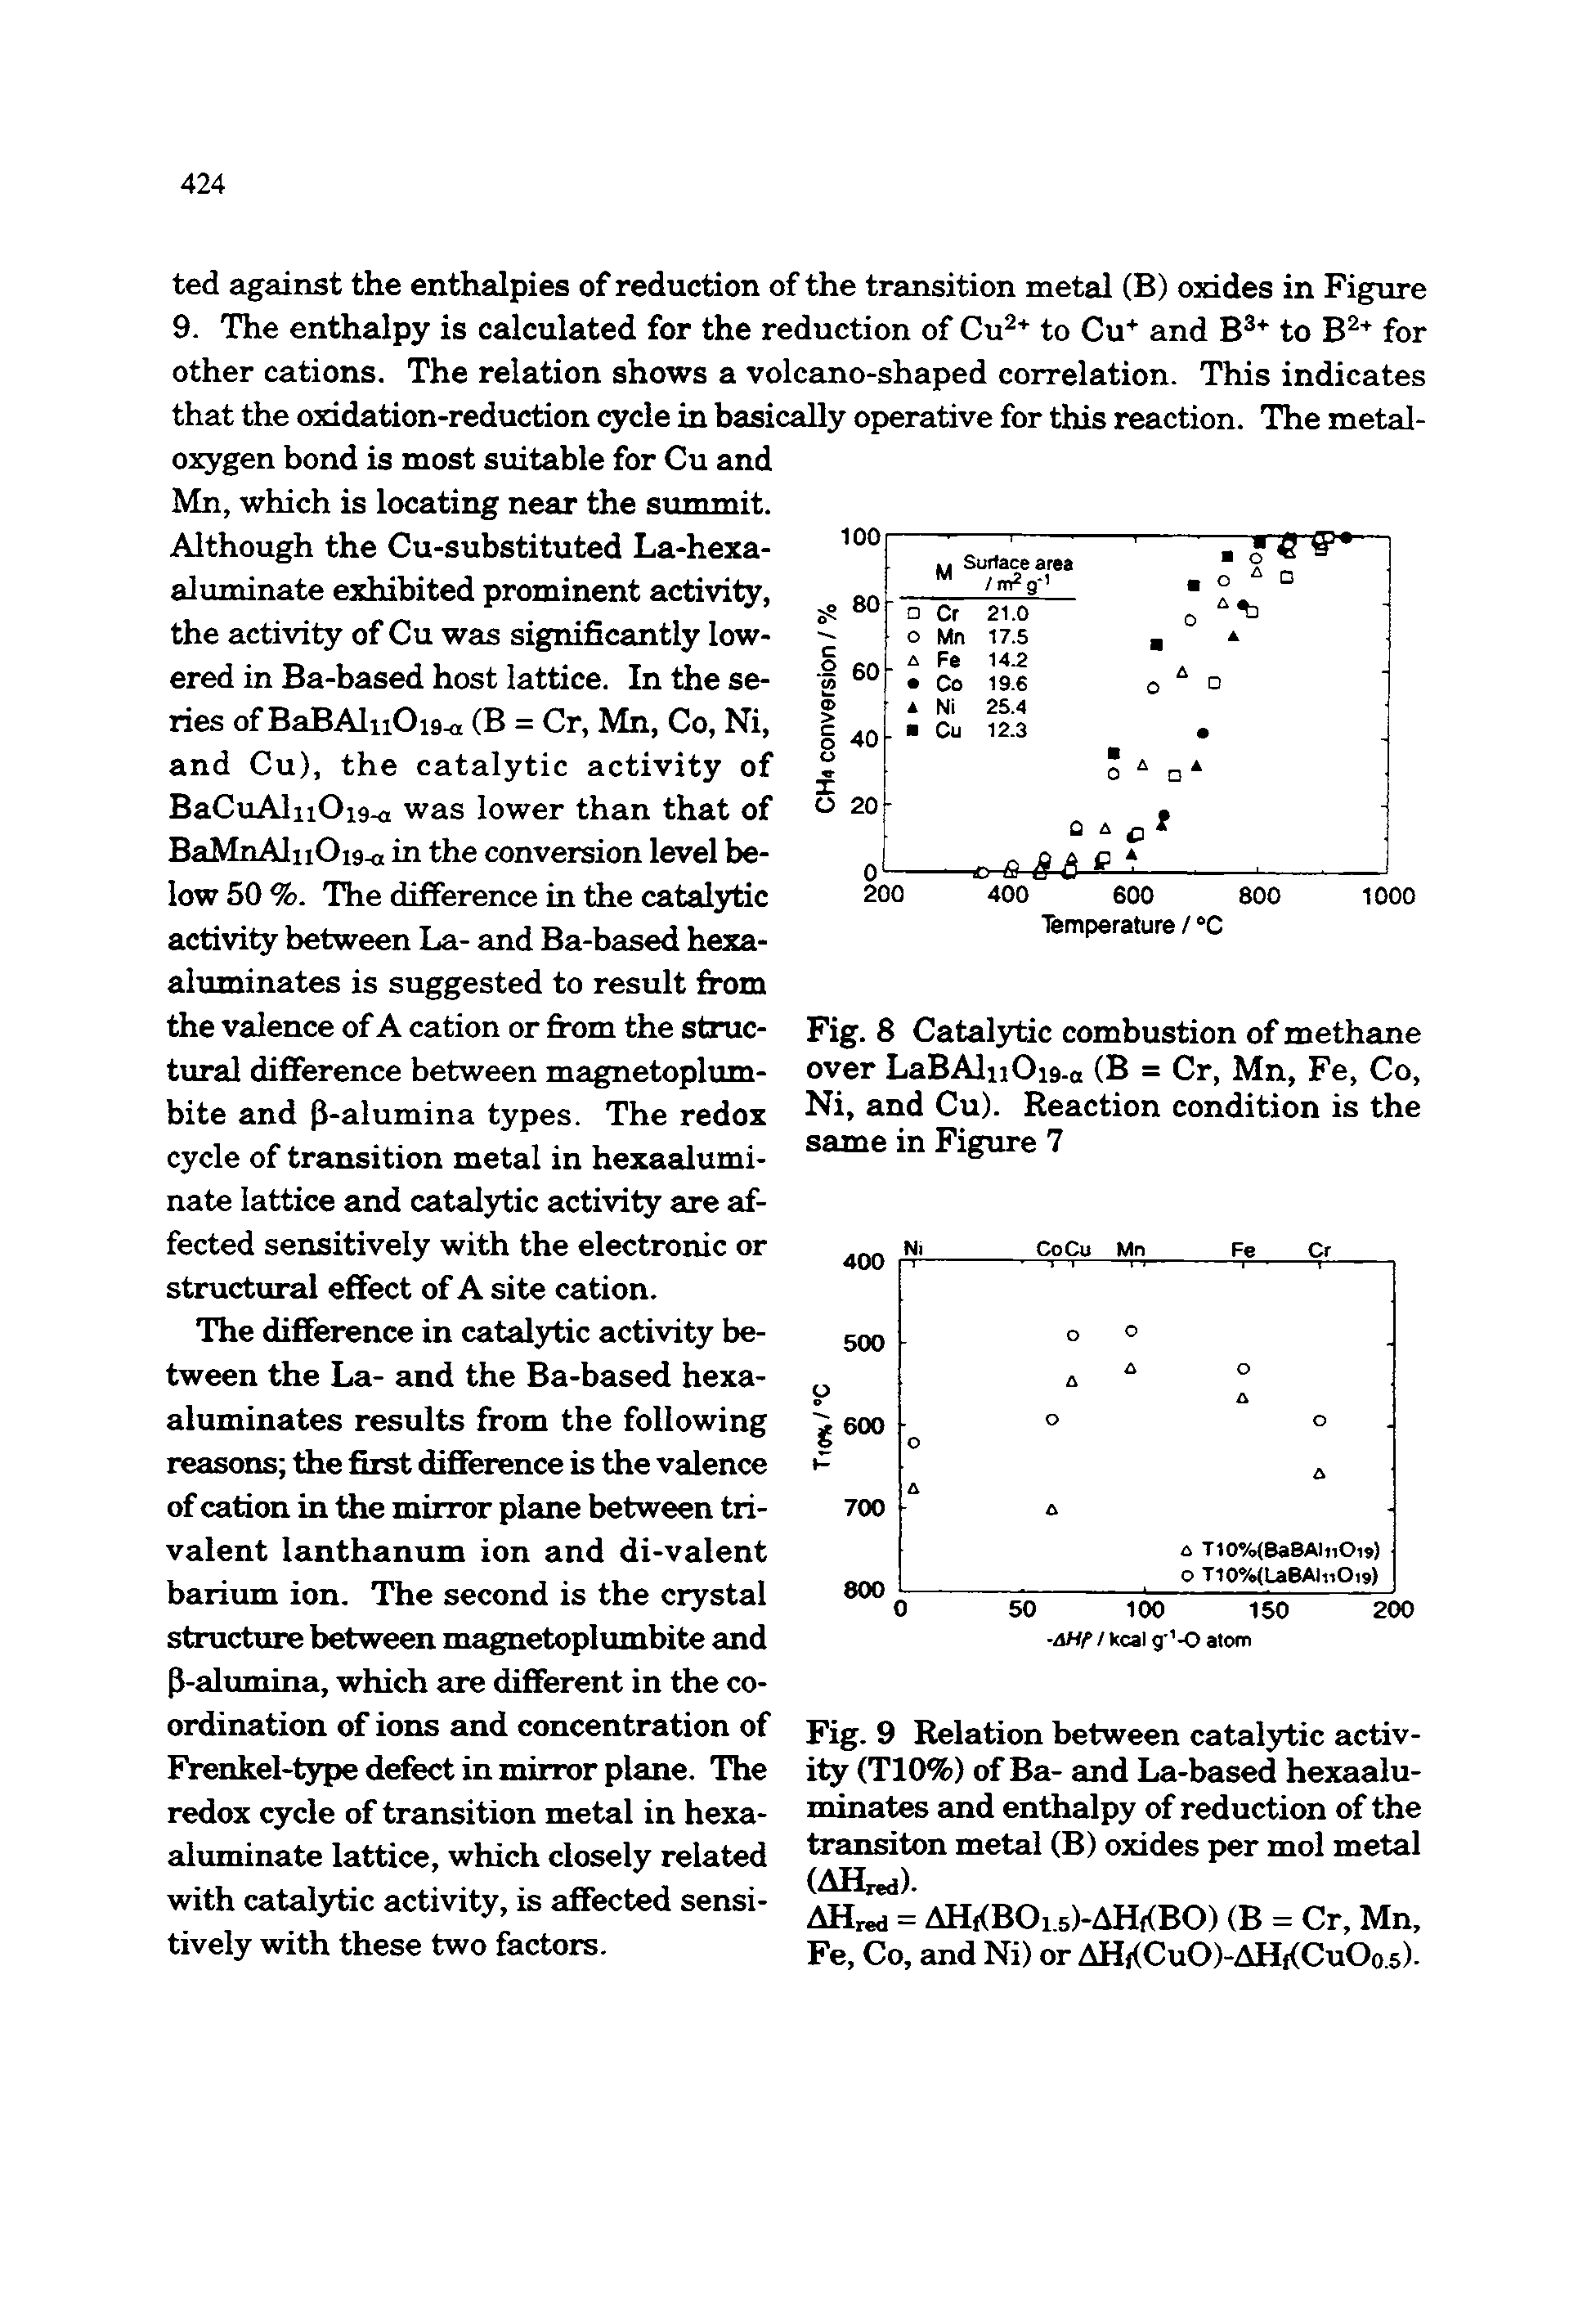 Fig. 8 Catalytic combustion of methane over LaBAliiOi9-o (B = Cr, Mn, Fe, Co, Ni, and Cu). Reaction condition is the same in Figure 7...